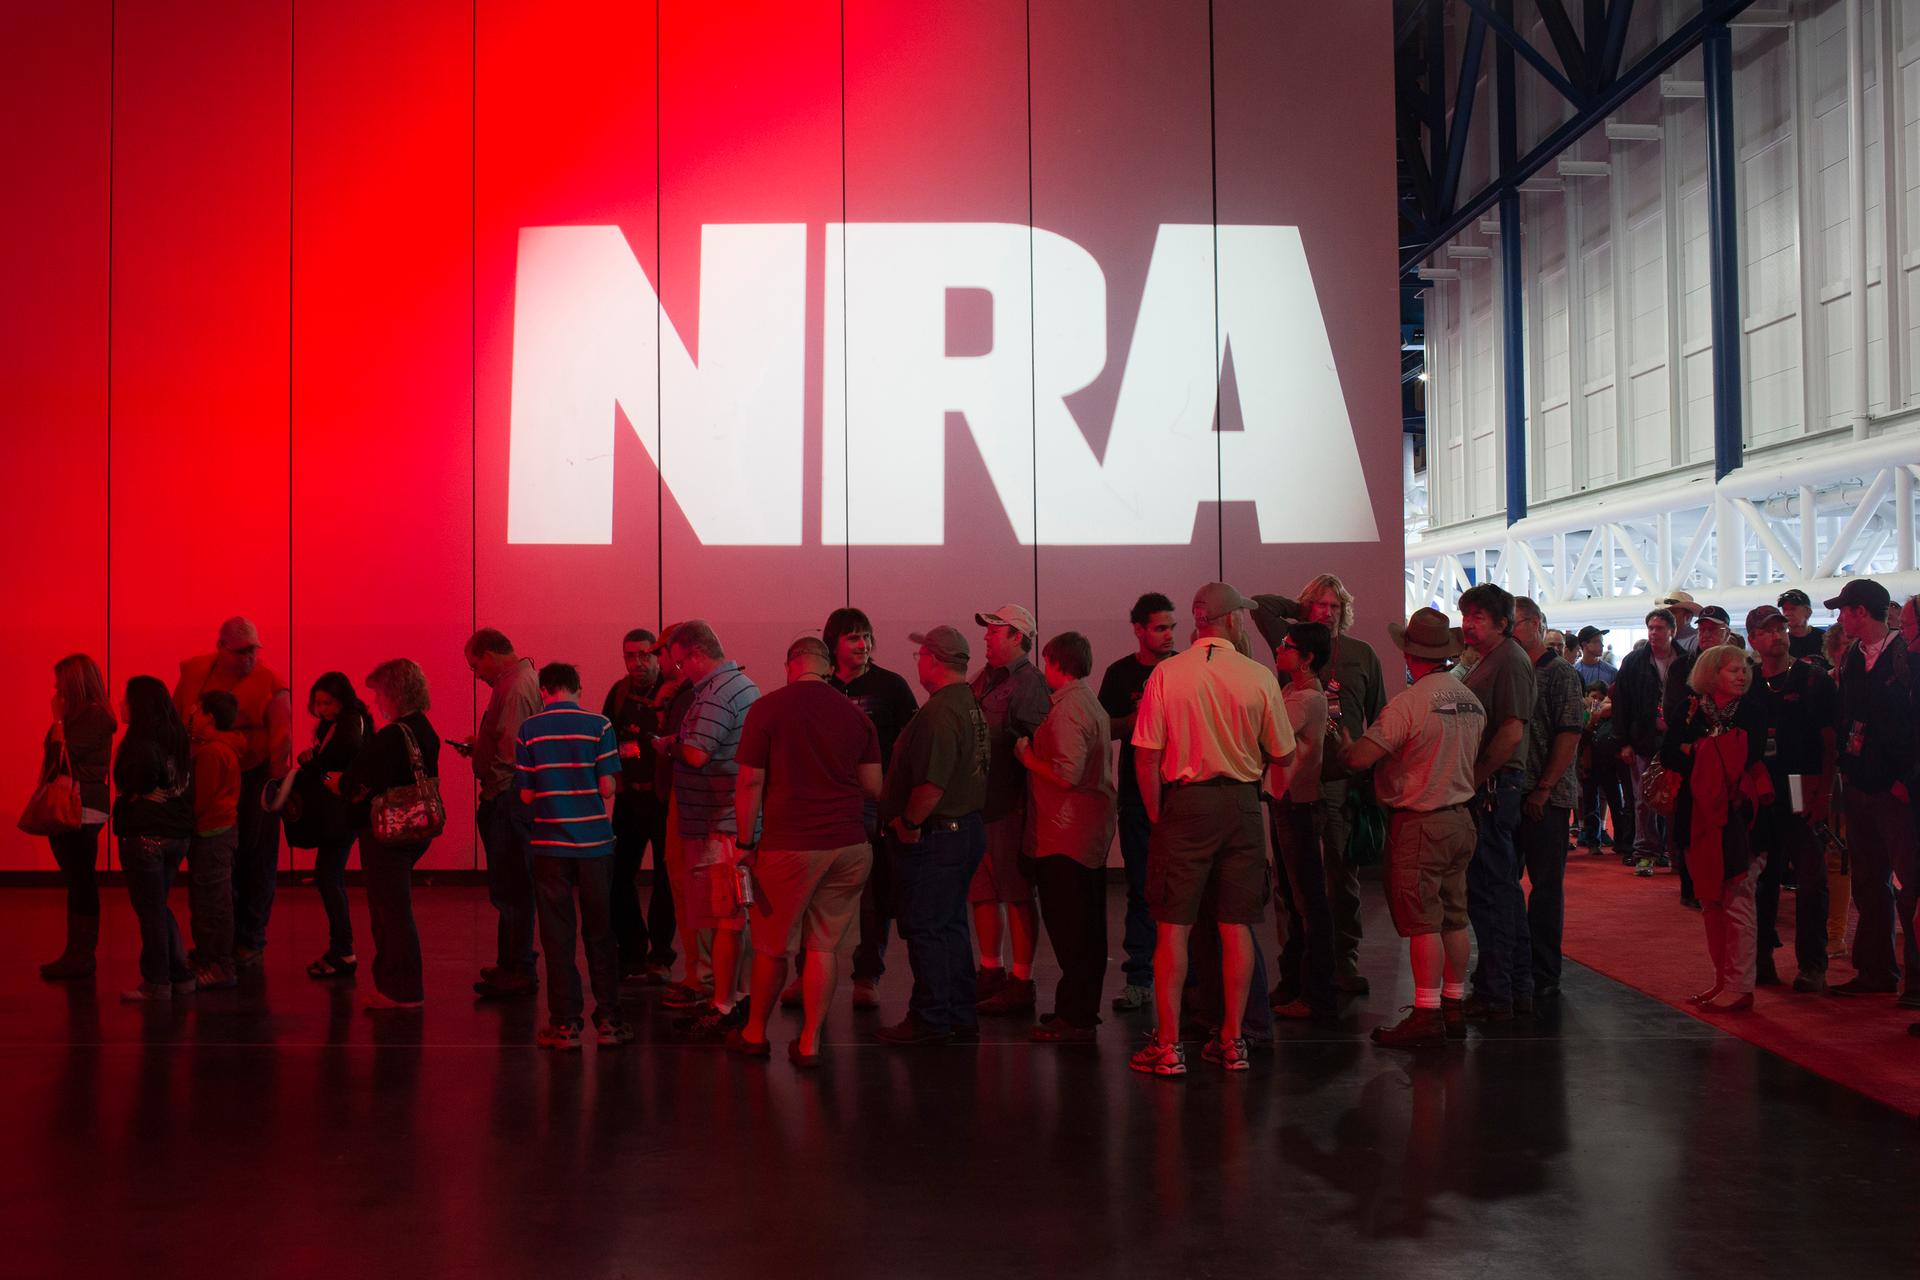 Attendees line up to meet musician Ted Nugent at a book signing event during the National Rifle Association's annual meeting in Houston, Texas, on May 5, 2013. 